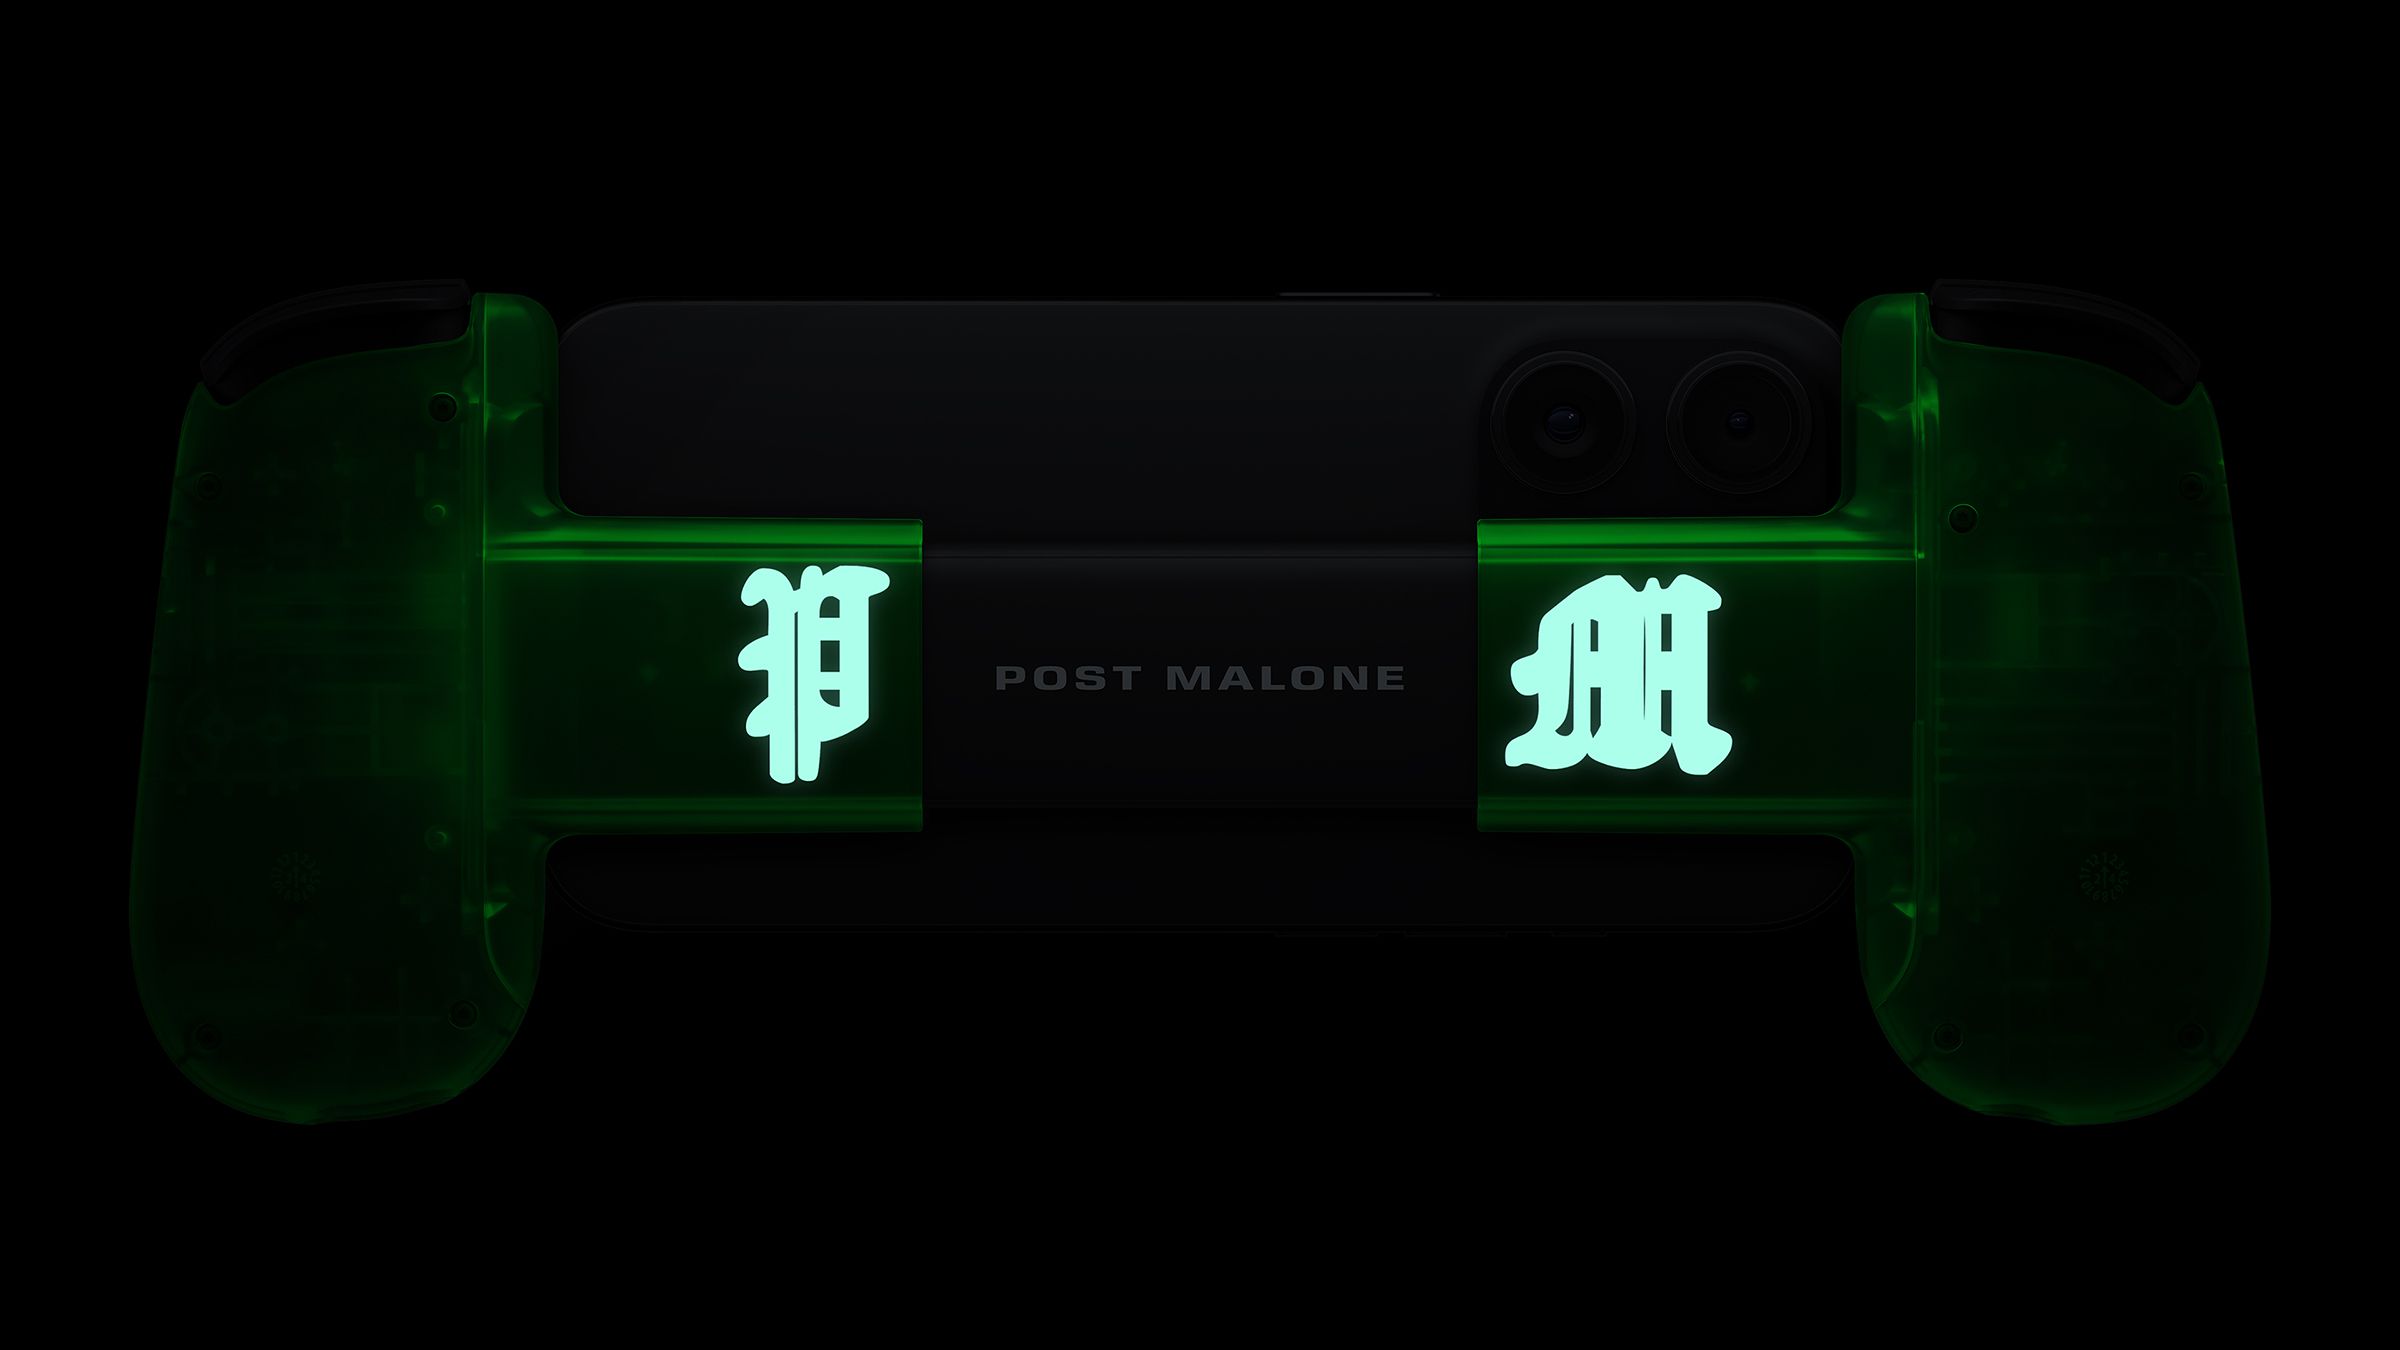 The back of the Backbone One: Post Malone Limited Edition Controller with an iPhone connected showing Post Malone’s logo glowing.